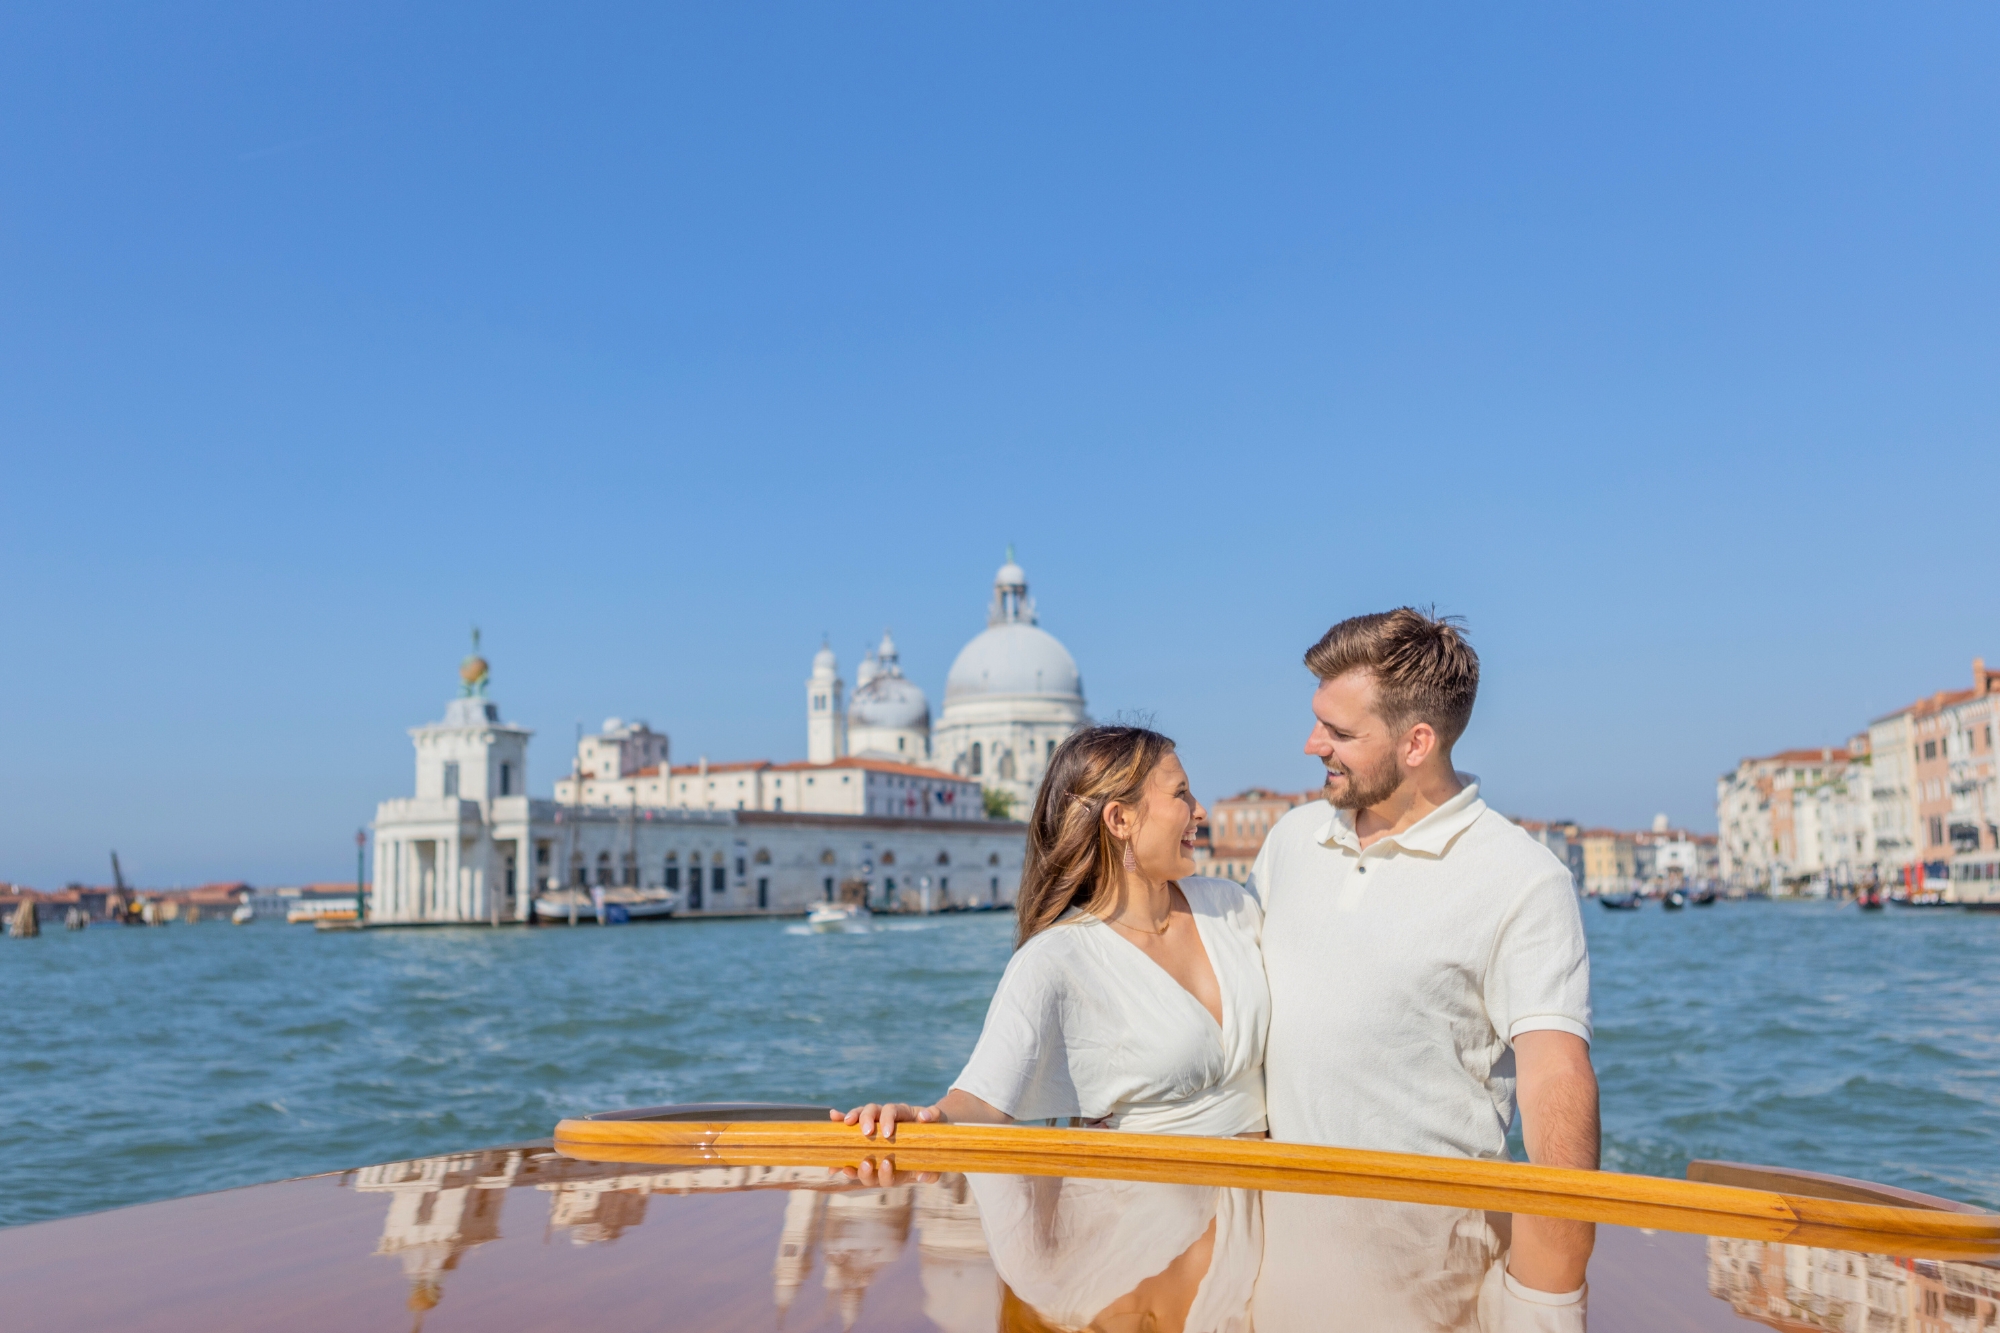 Engagement photoshoot by Camilla, Localgrapher in Venice